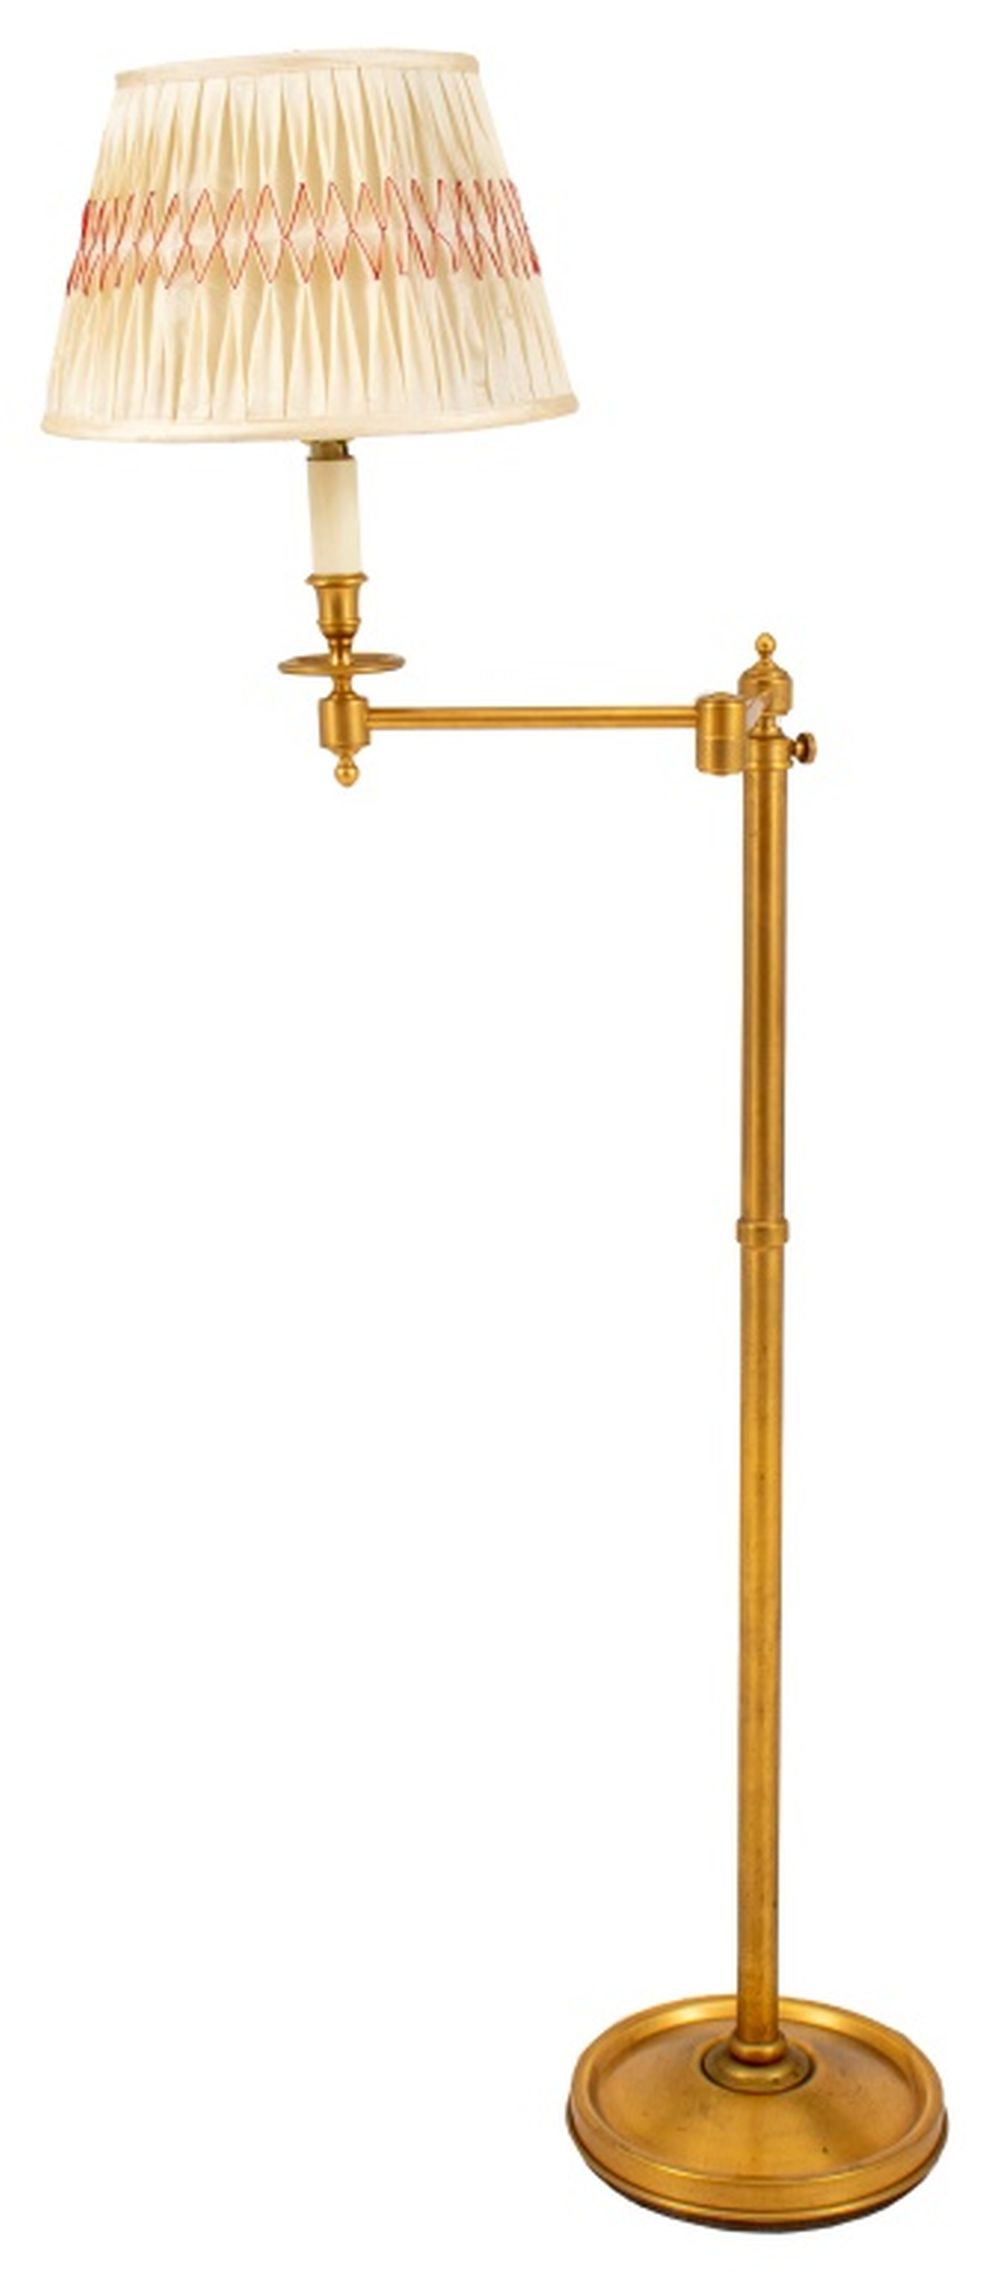 GILDED BRONZE LIBRARY SWING ARM